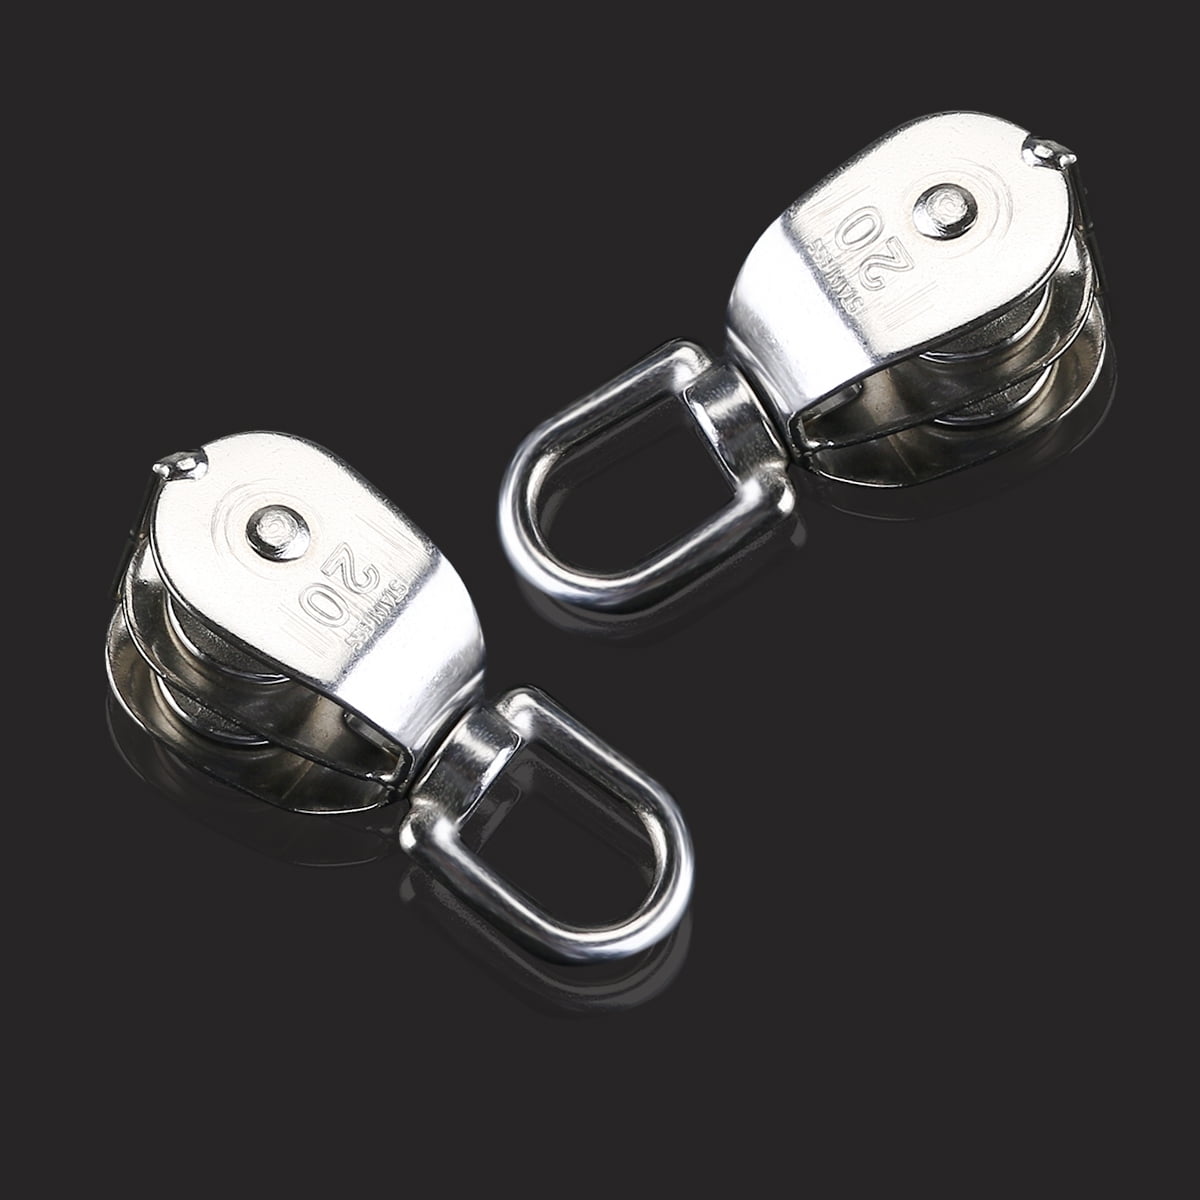 WINOMO Double Pulley Block 2pcs Stainless Steel 304 Double Swivel Pulley Block